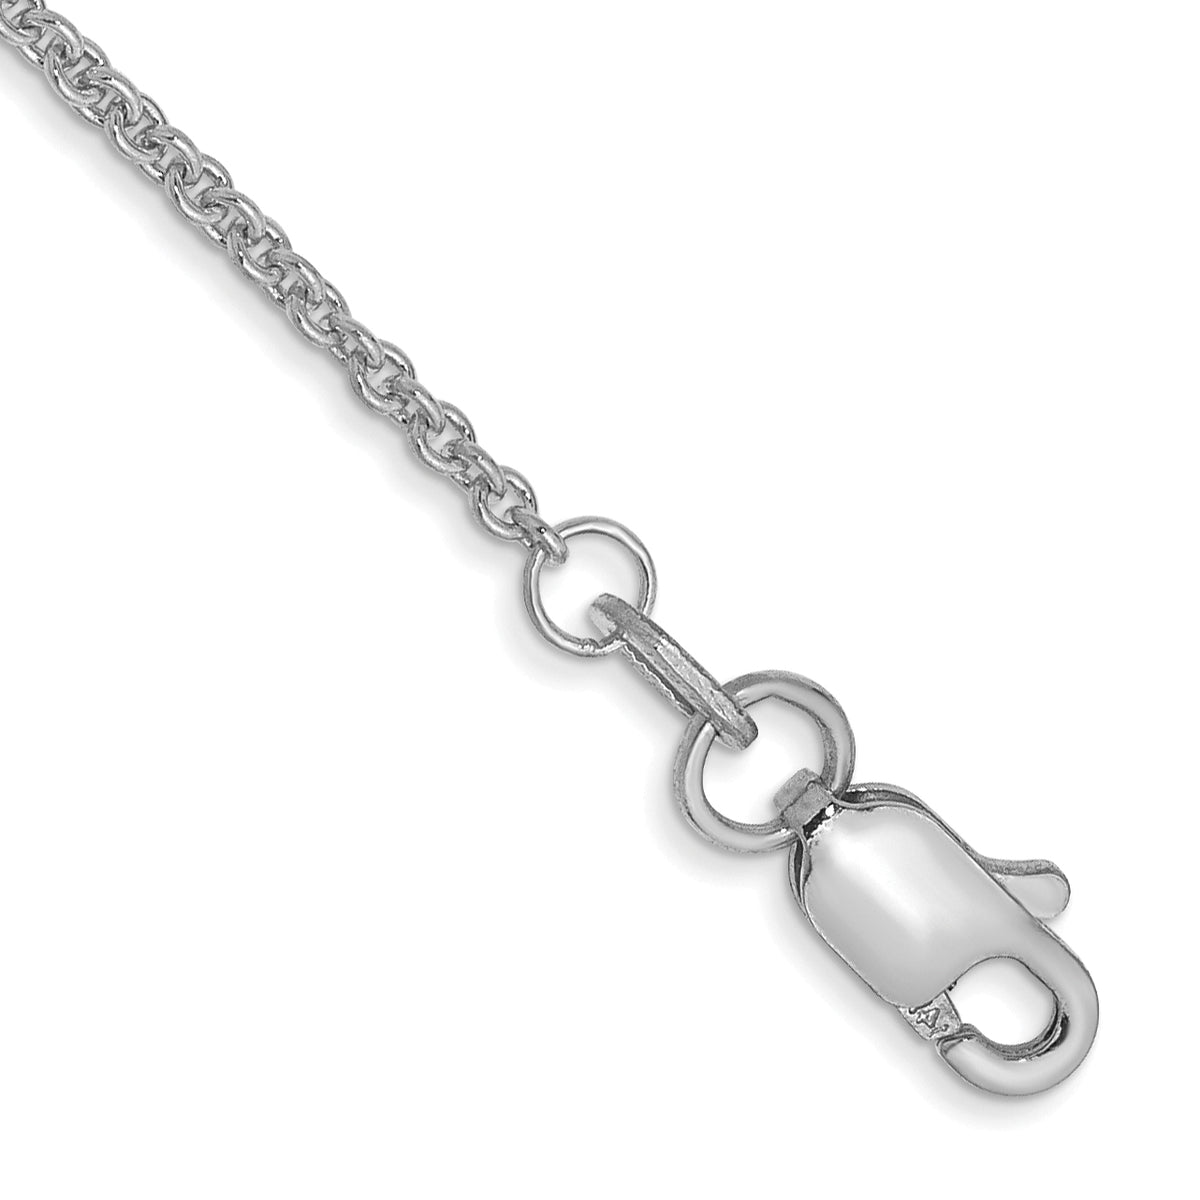 14K White Gold 10 inch 1.4mm Round Open Link Cable with Lobster Clasp Anklet